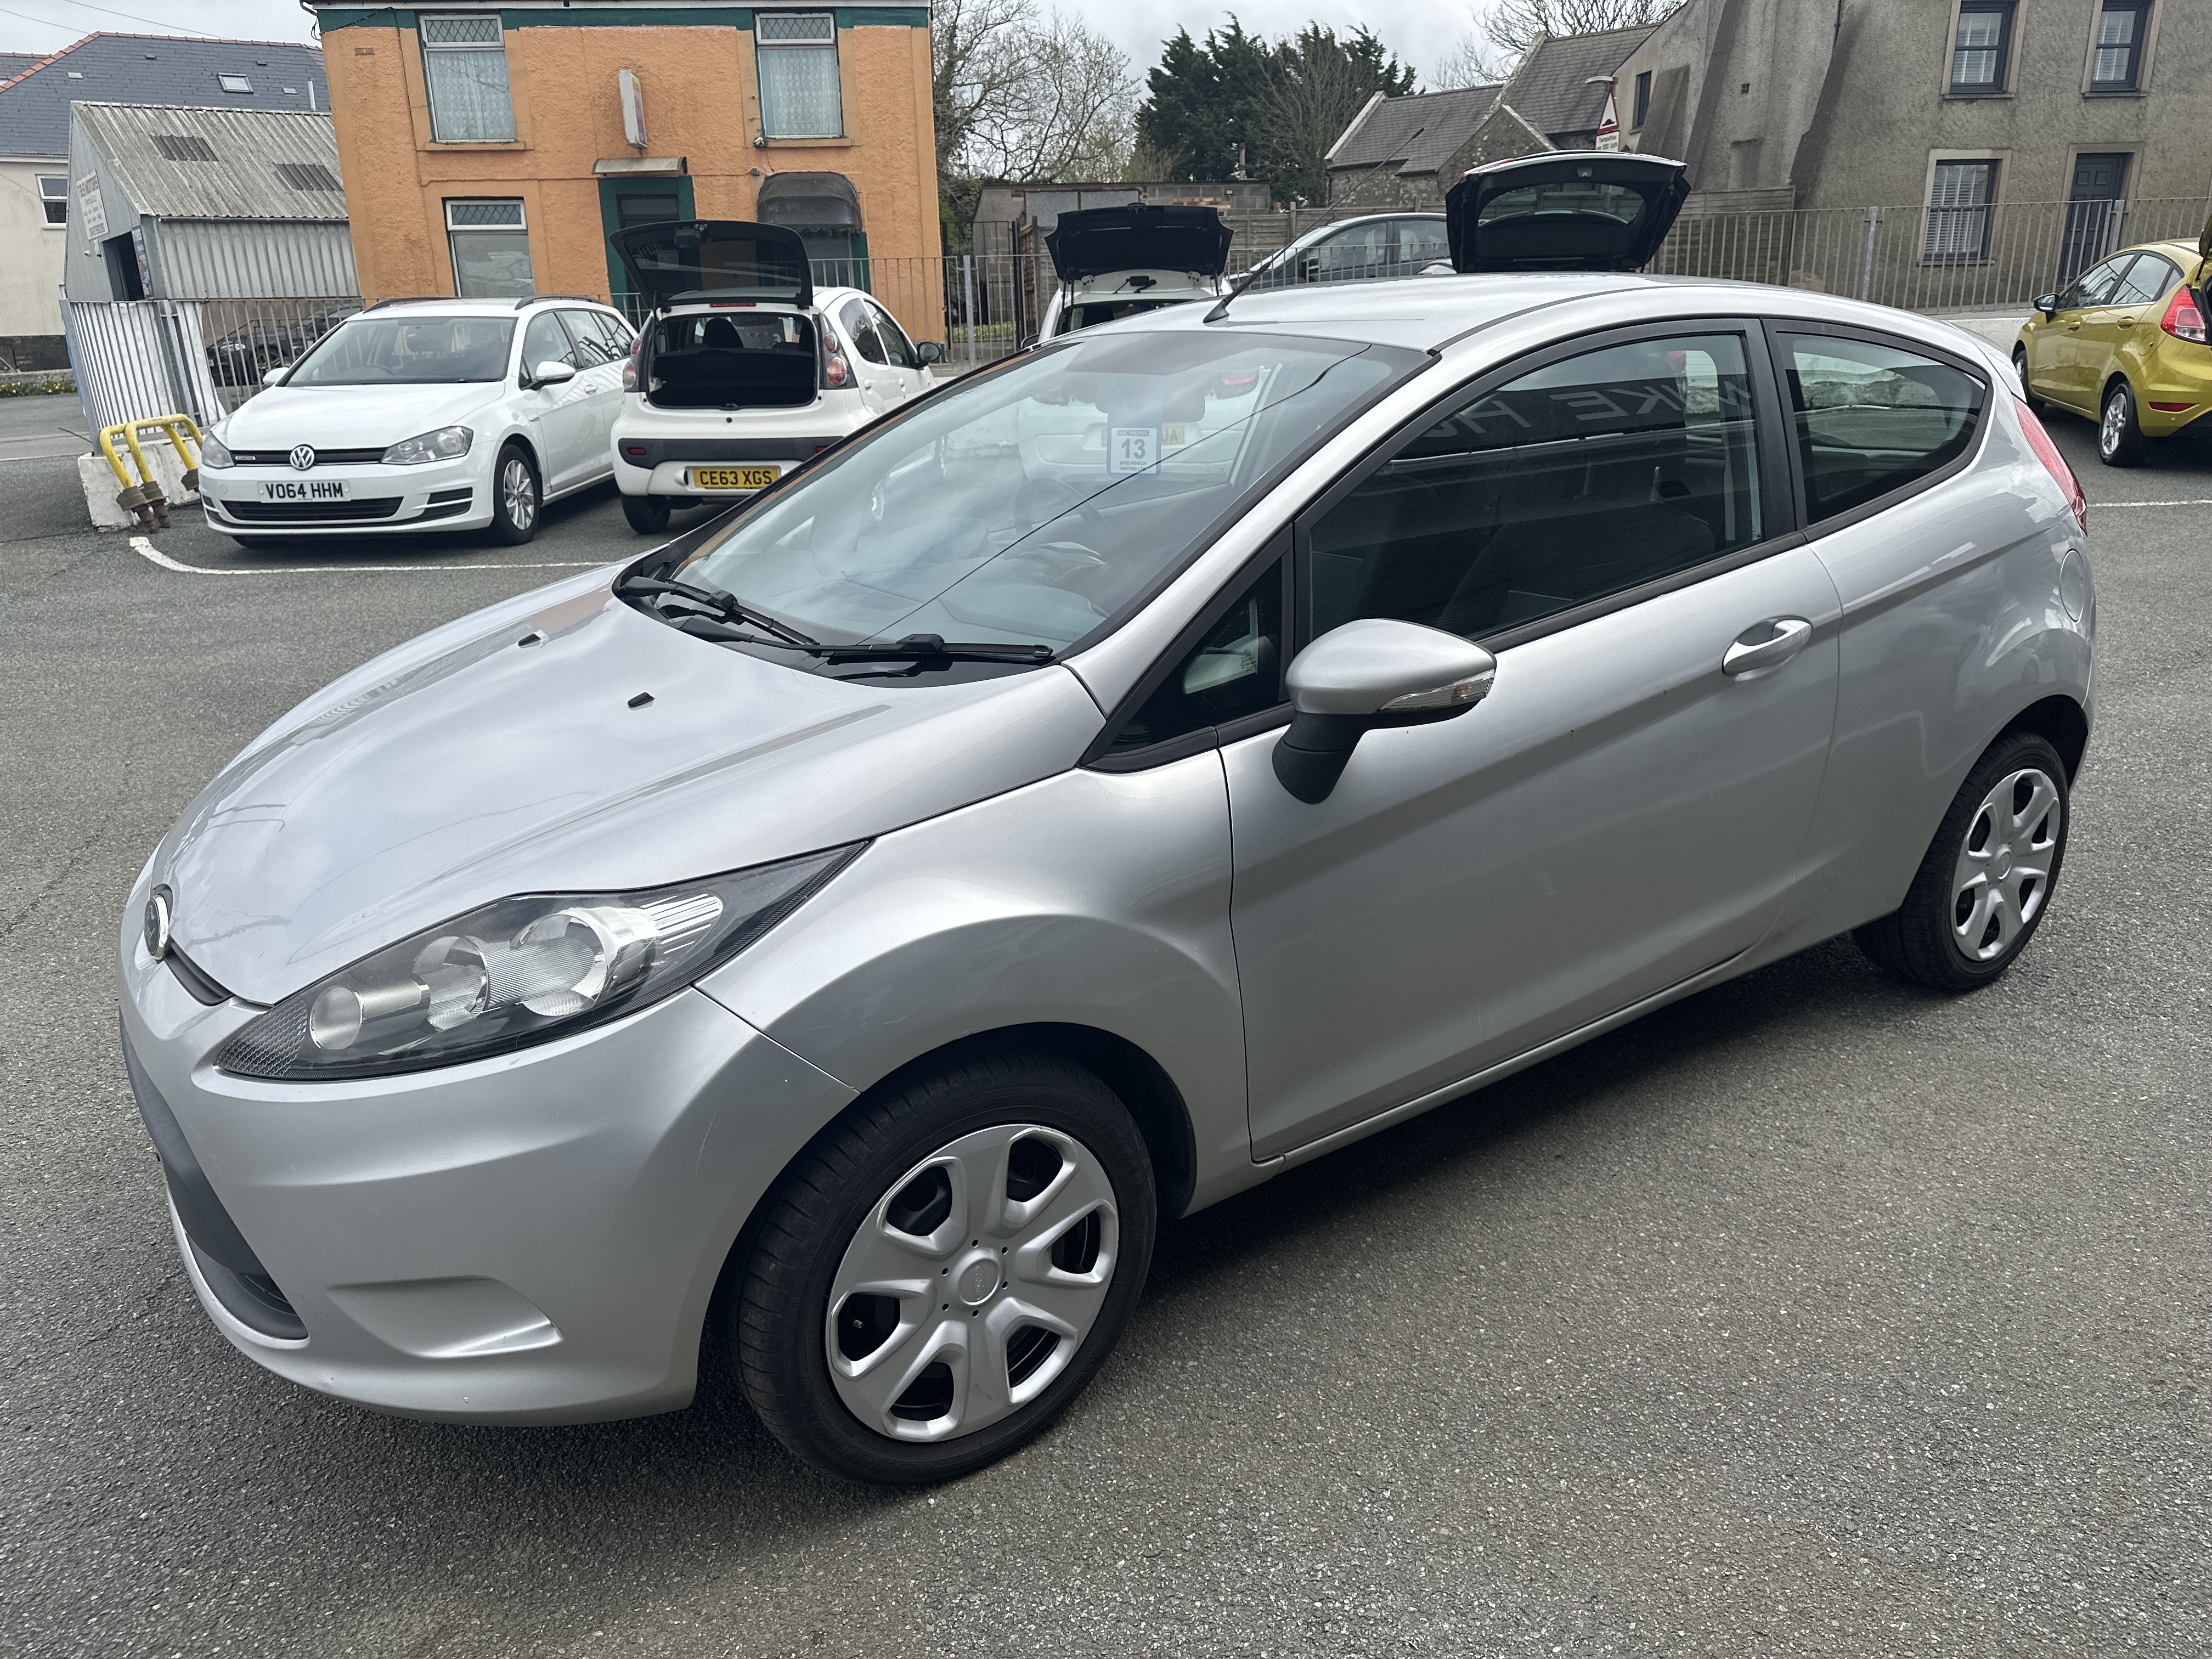 Ford FIESTA EDGE 70 for sale at Mike Howlin Motor Sales Pembrokeshire